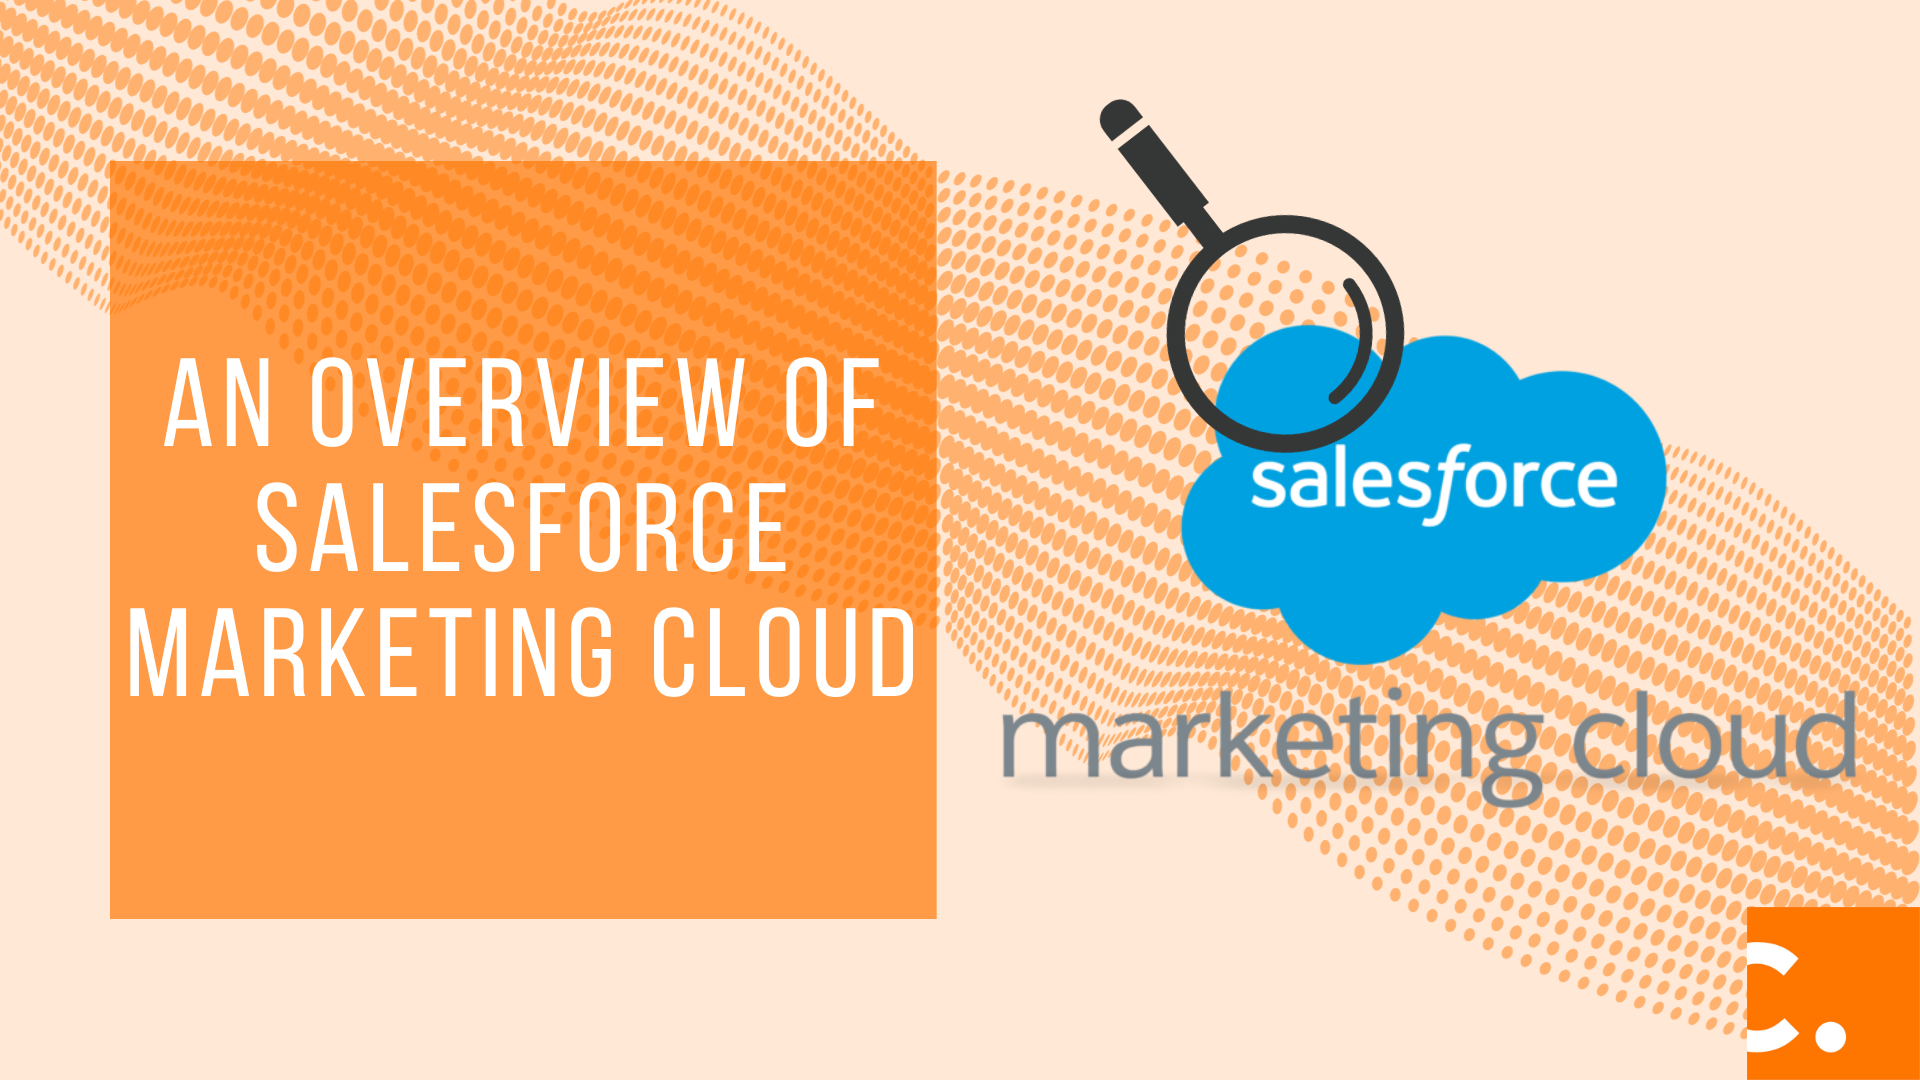 Salesforce Marketing Cloud Help You To Optimize Your Marketing Campaigns